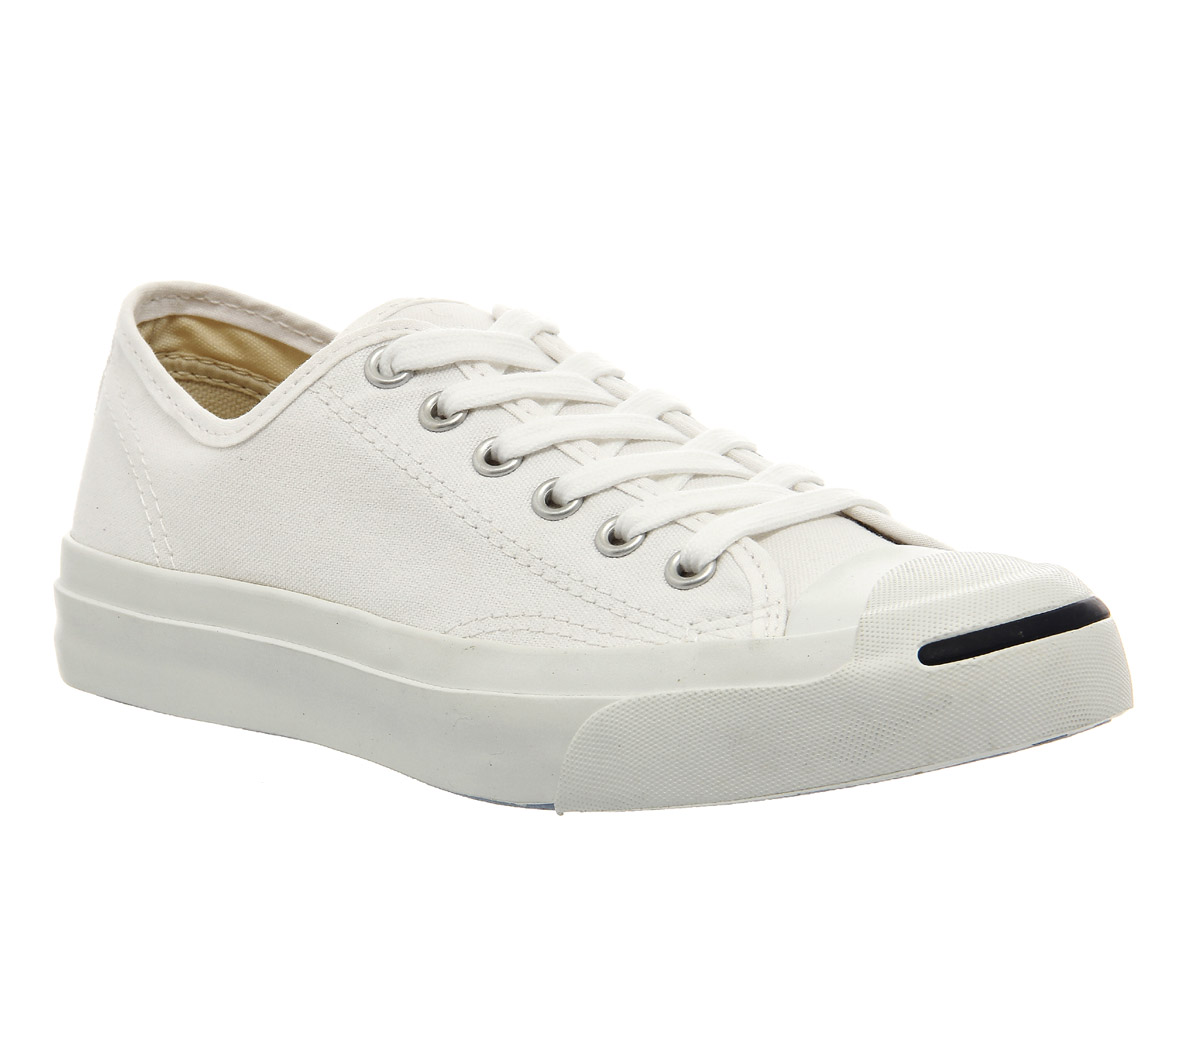 Converse Jack Purcell Jack Purcell Ltt White - Unisex Sports